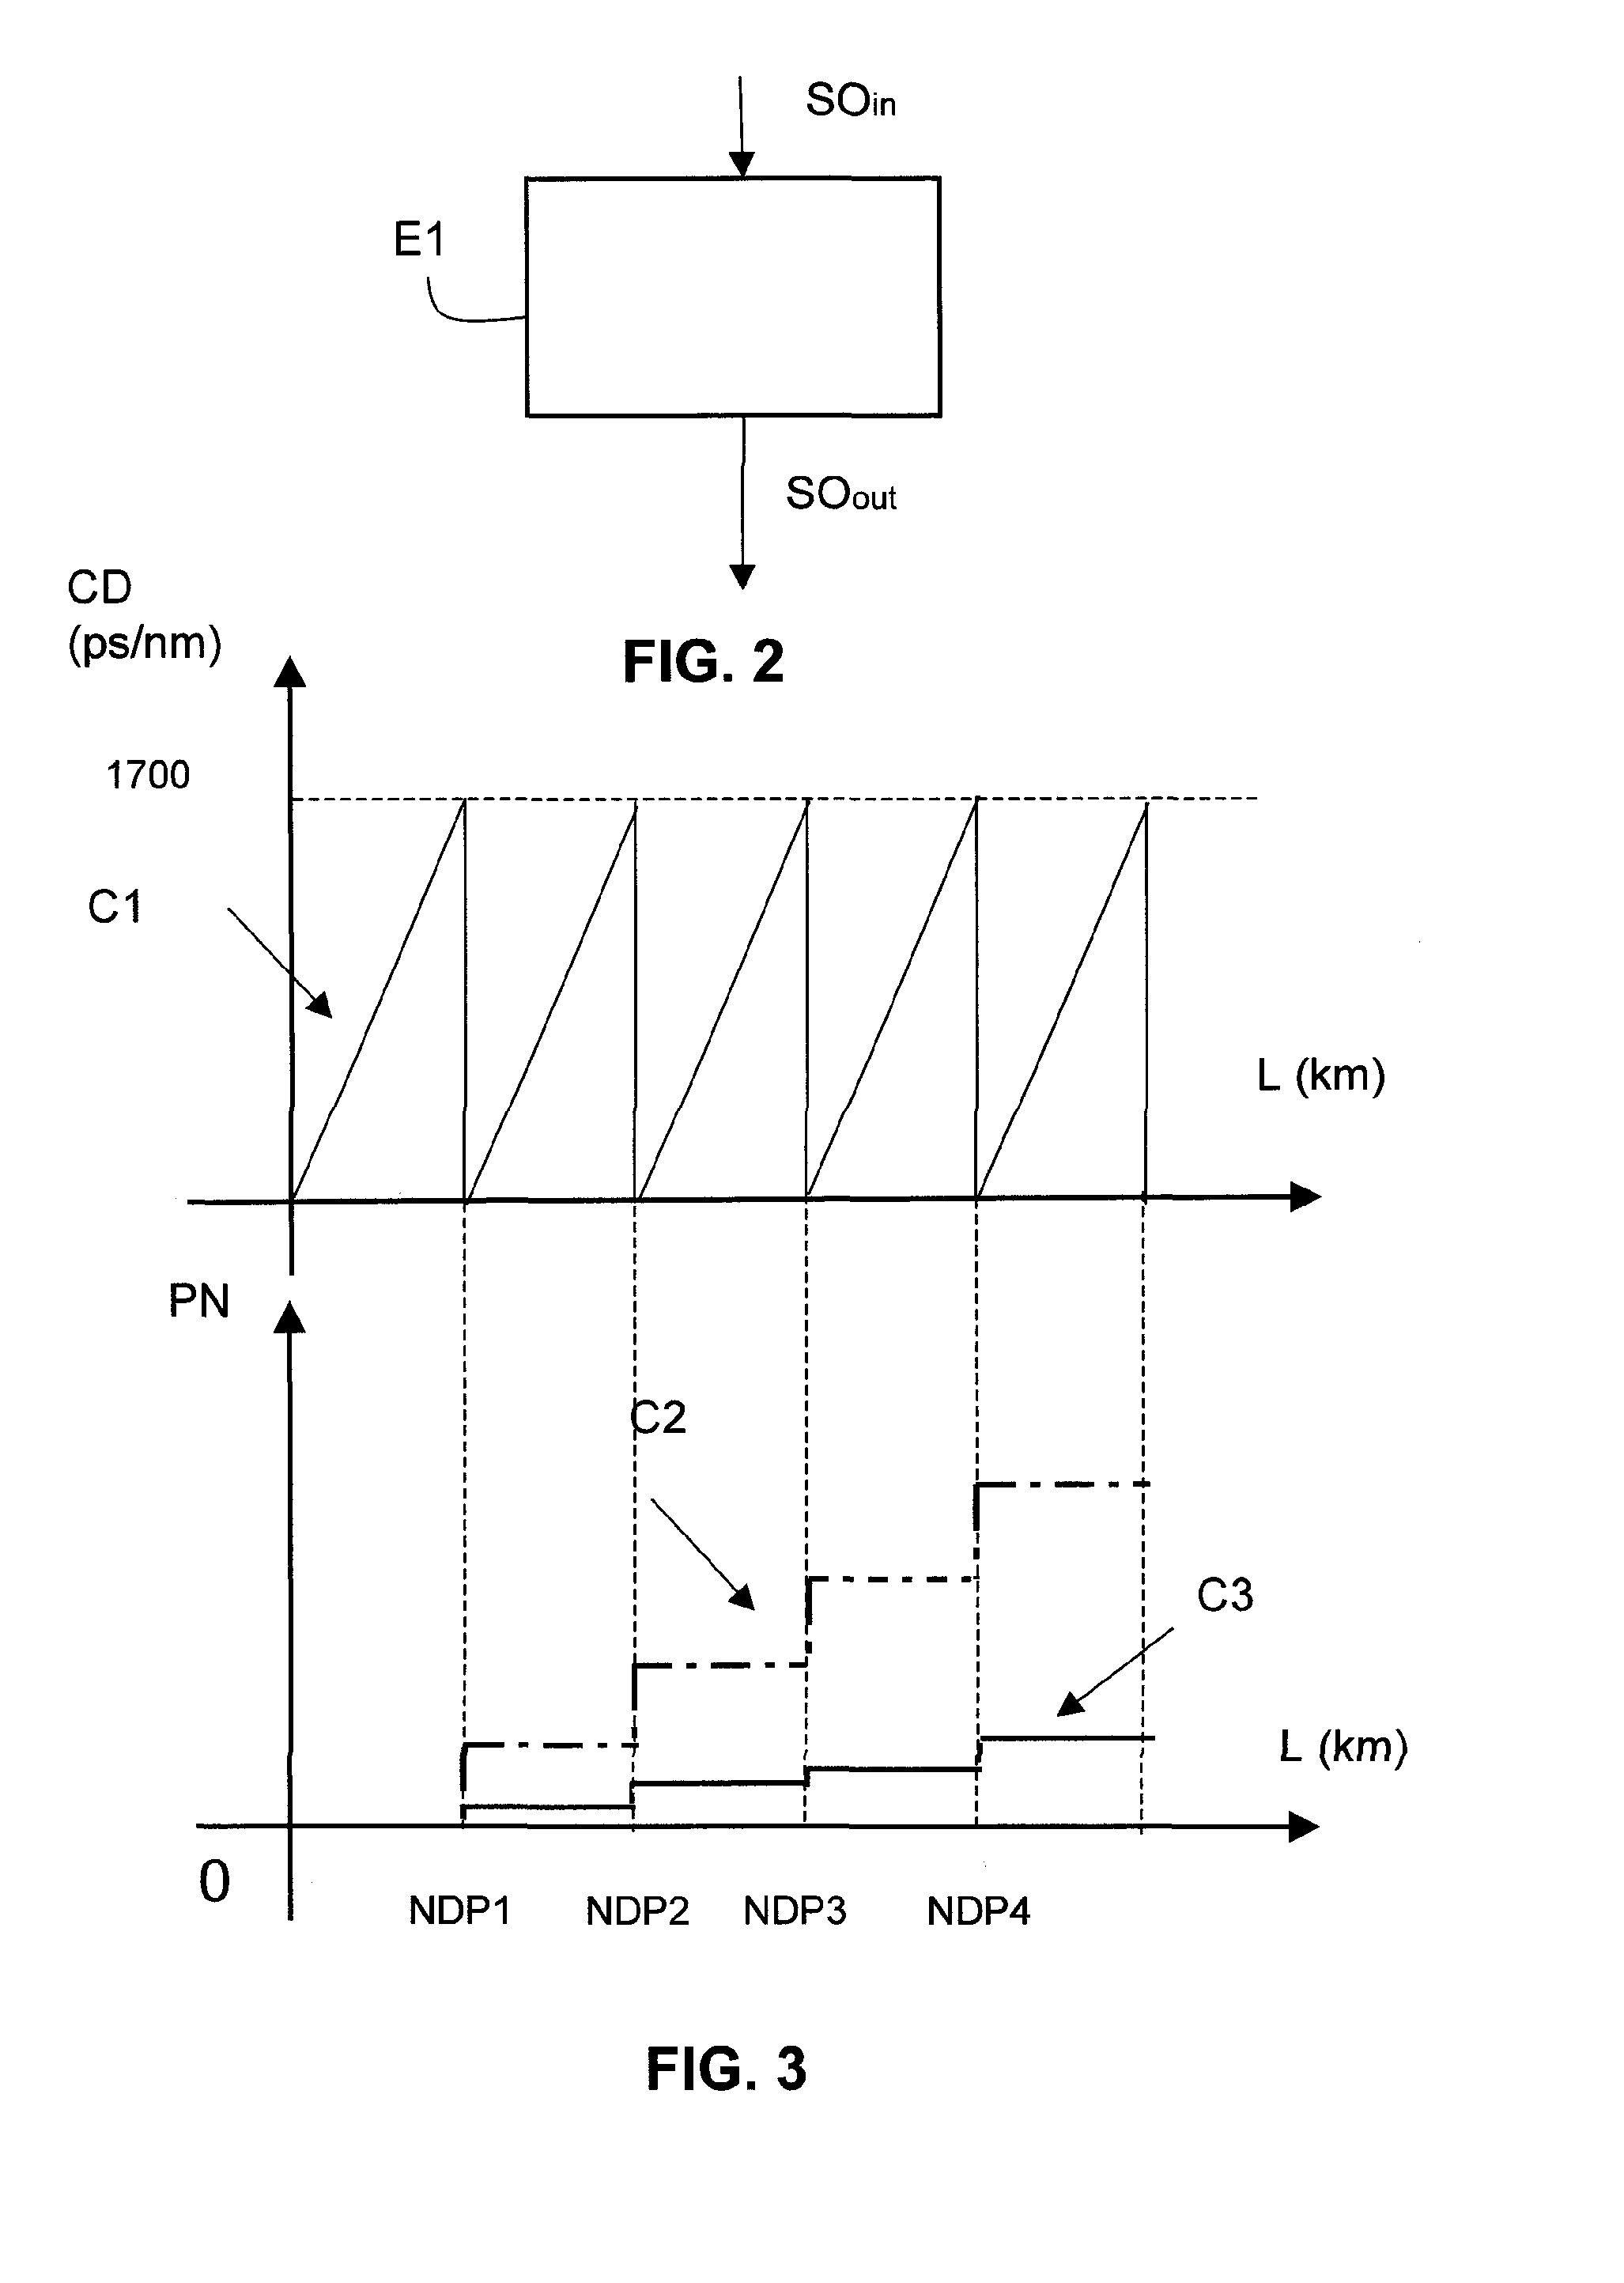 Method of Limiting the Non-Linear Phase Noise of a Phase-Modulated Optical Signal of Constant Amplitude, and an Associated Device